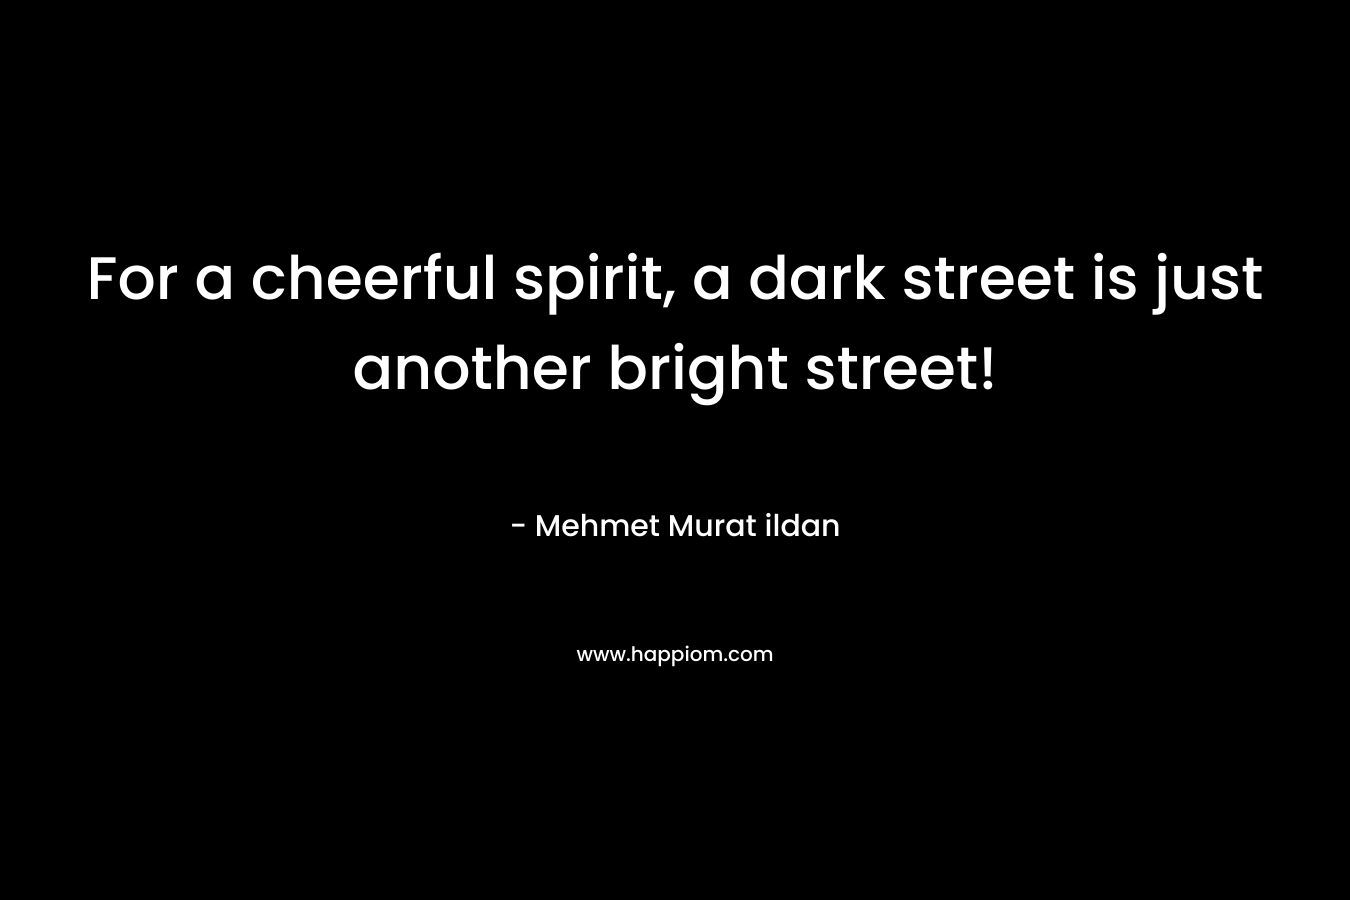 For a cheerful spirit, a dark street is just another bright street!